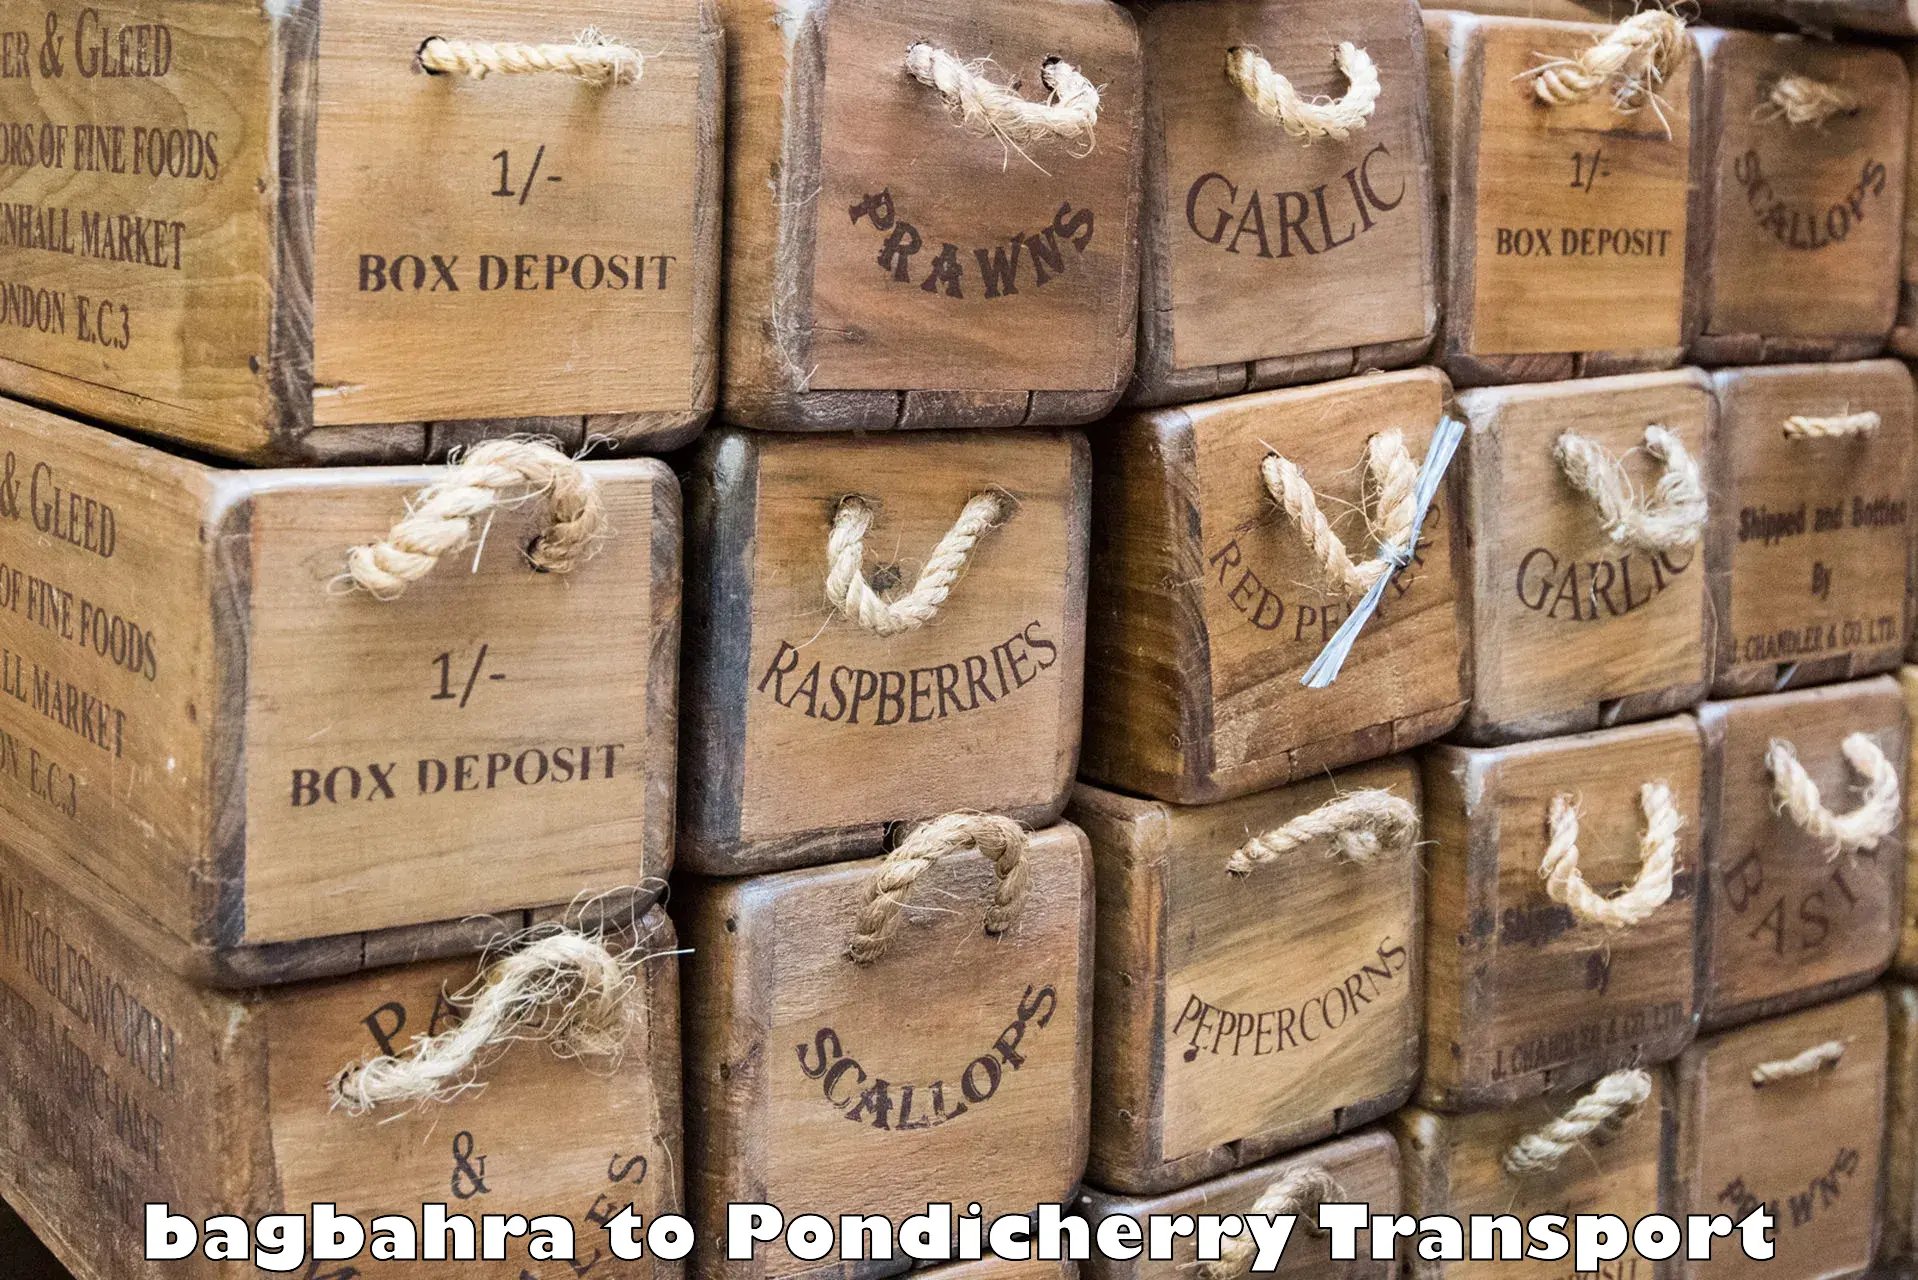 Air cargo transport services bagbahra to Pondicherry